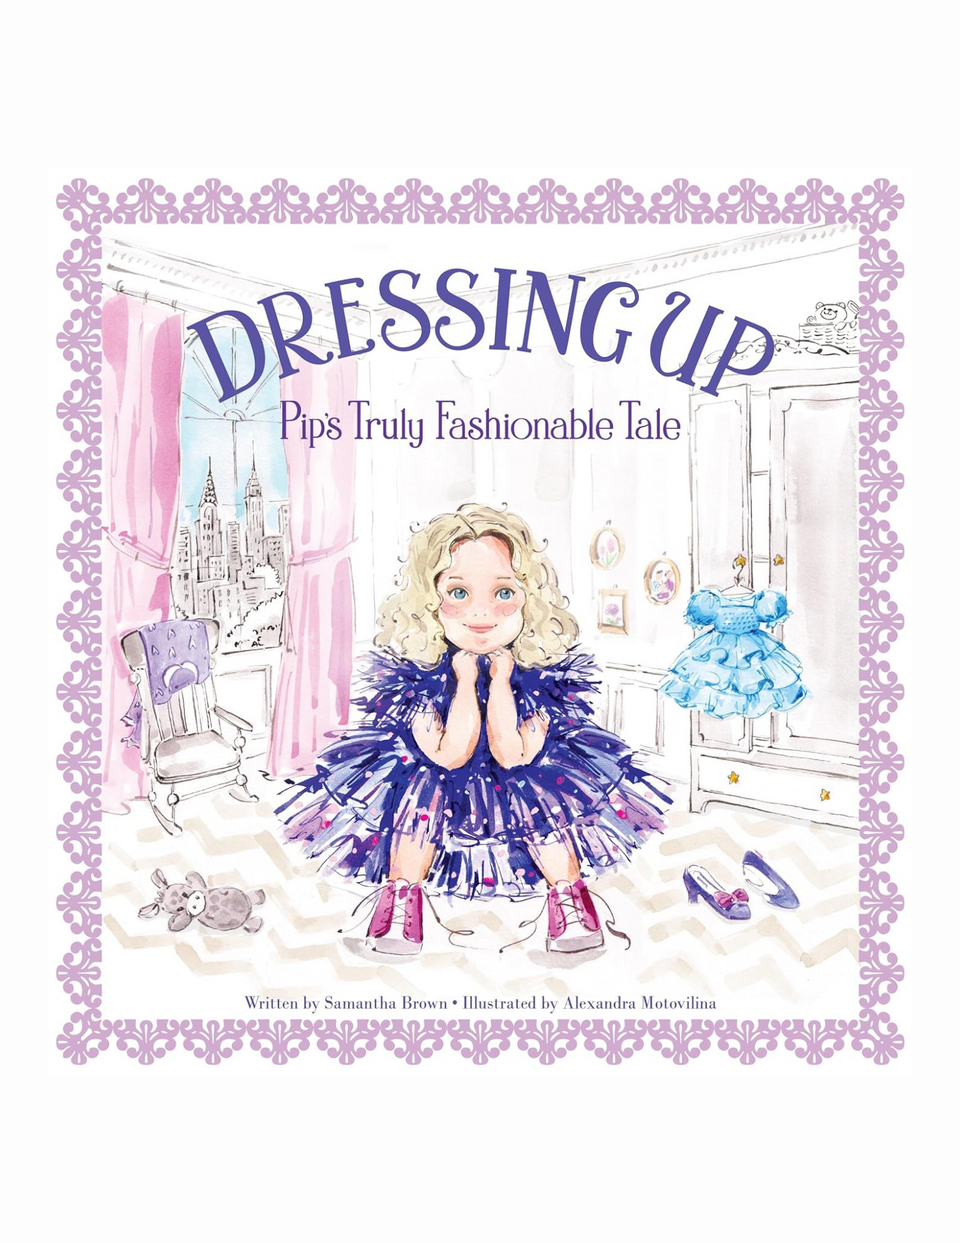 Dressing Up by Samantha Brown-Pip's Truly Fashionable Tale